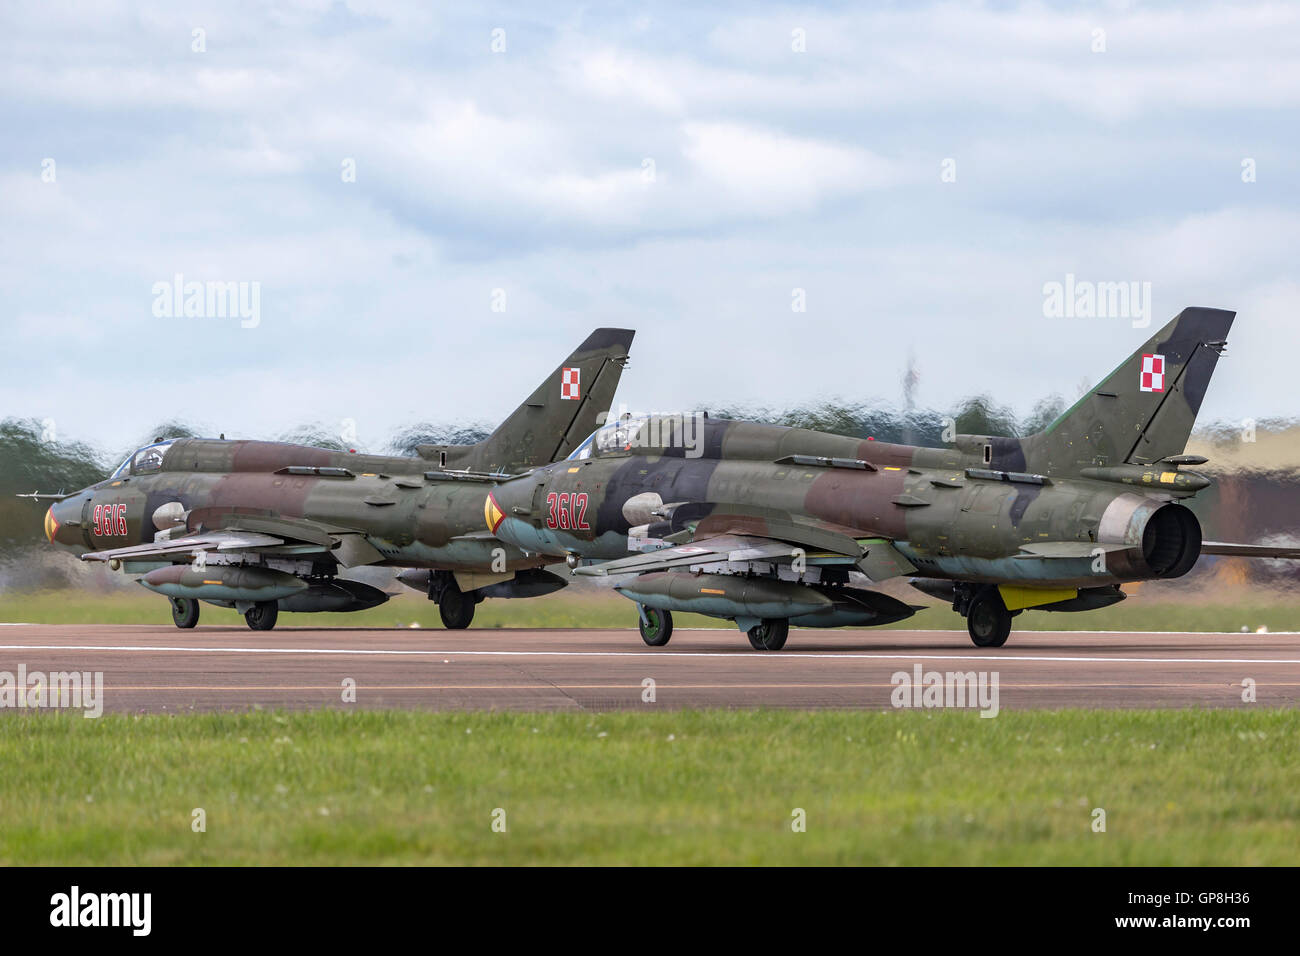 Polish Air Force (Siły Powietrzne) Sukhoi Su-22M4 “Fitter” attack aircraft Stock Photo